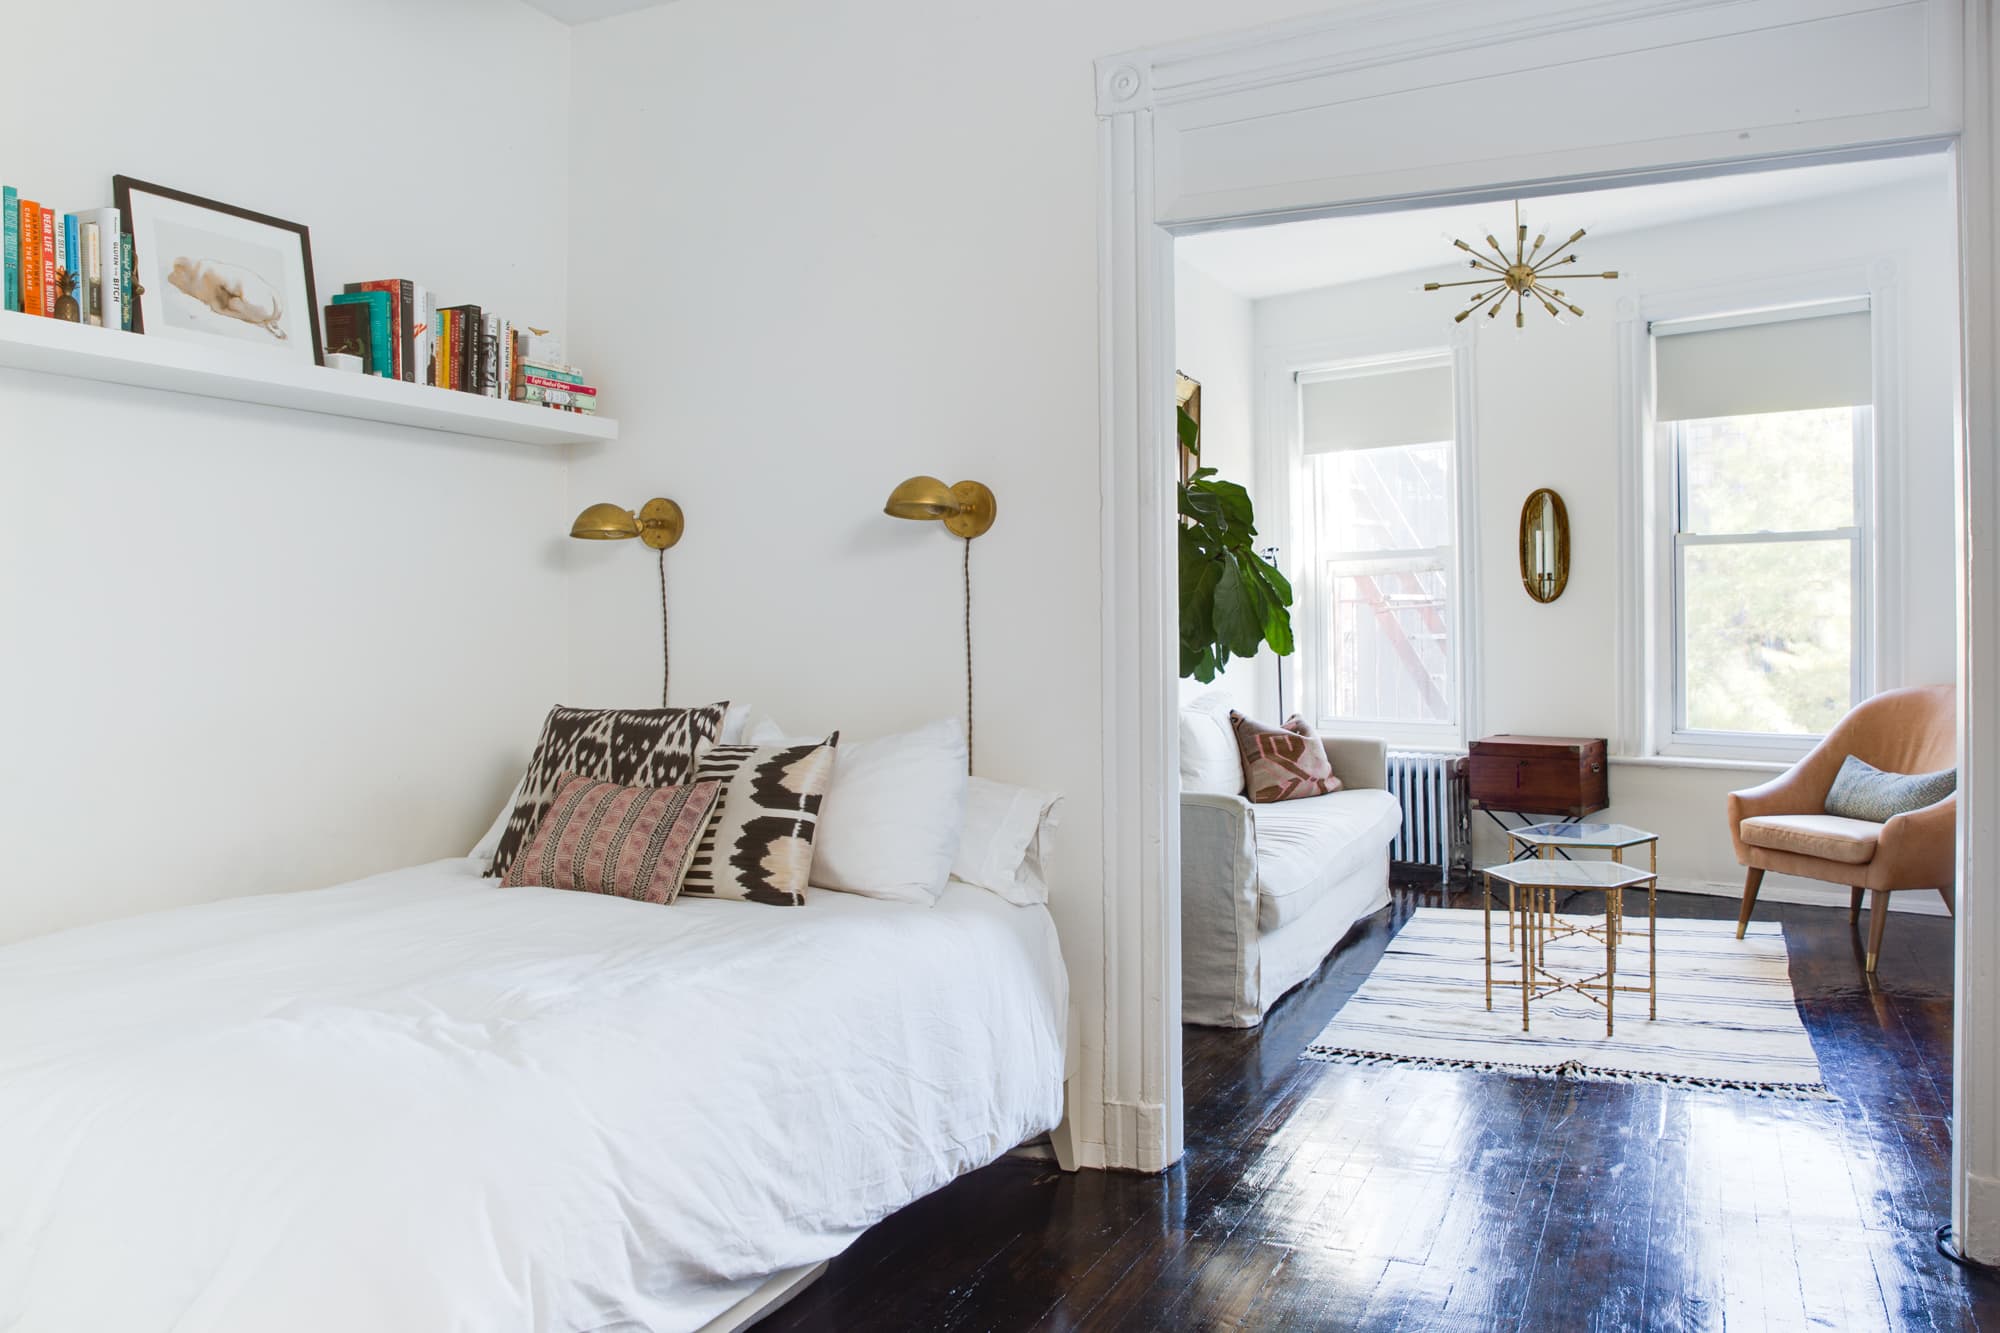 18 Simple Storage Tips for Small Apartments